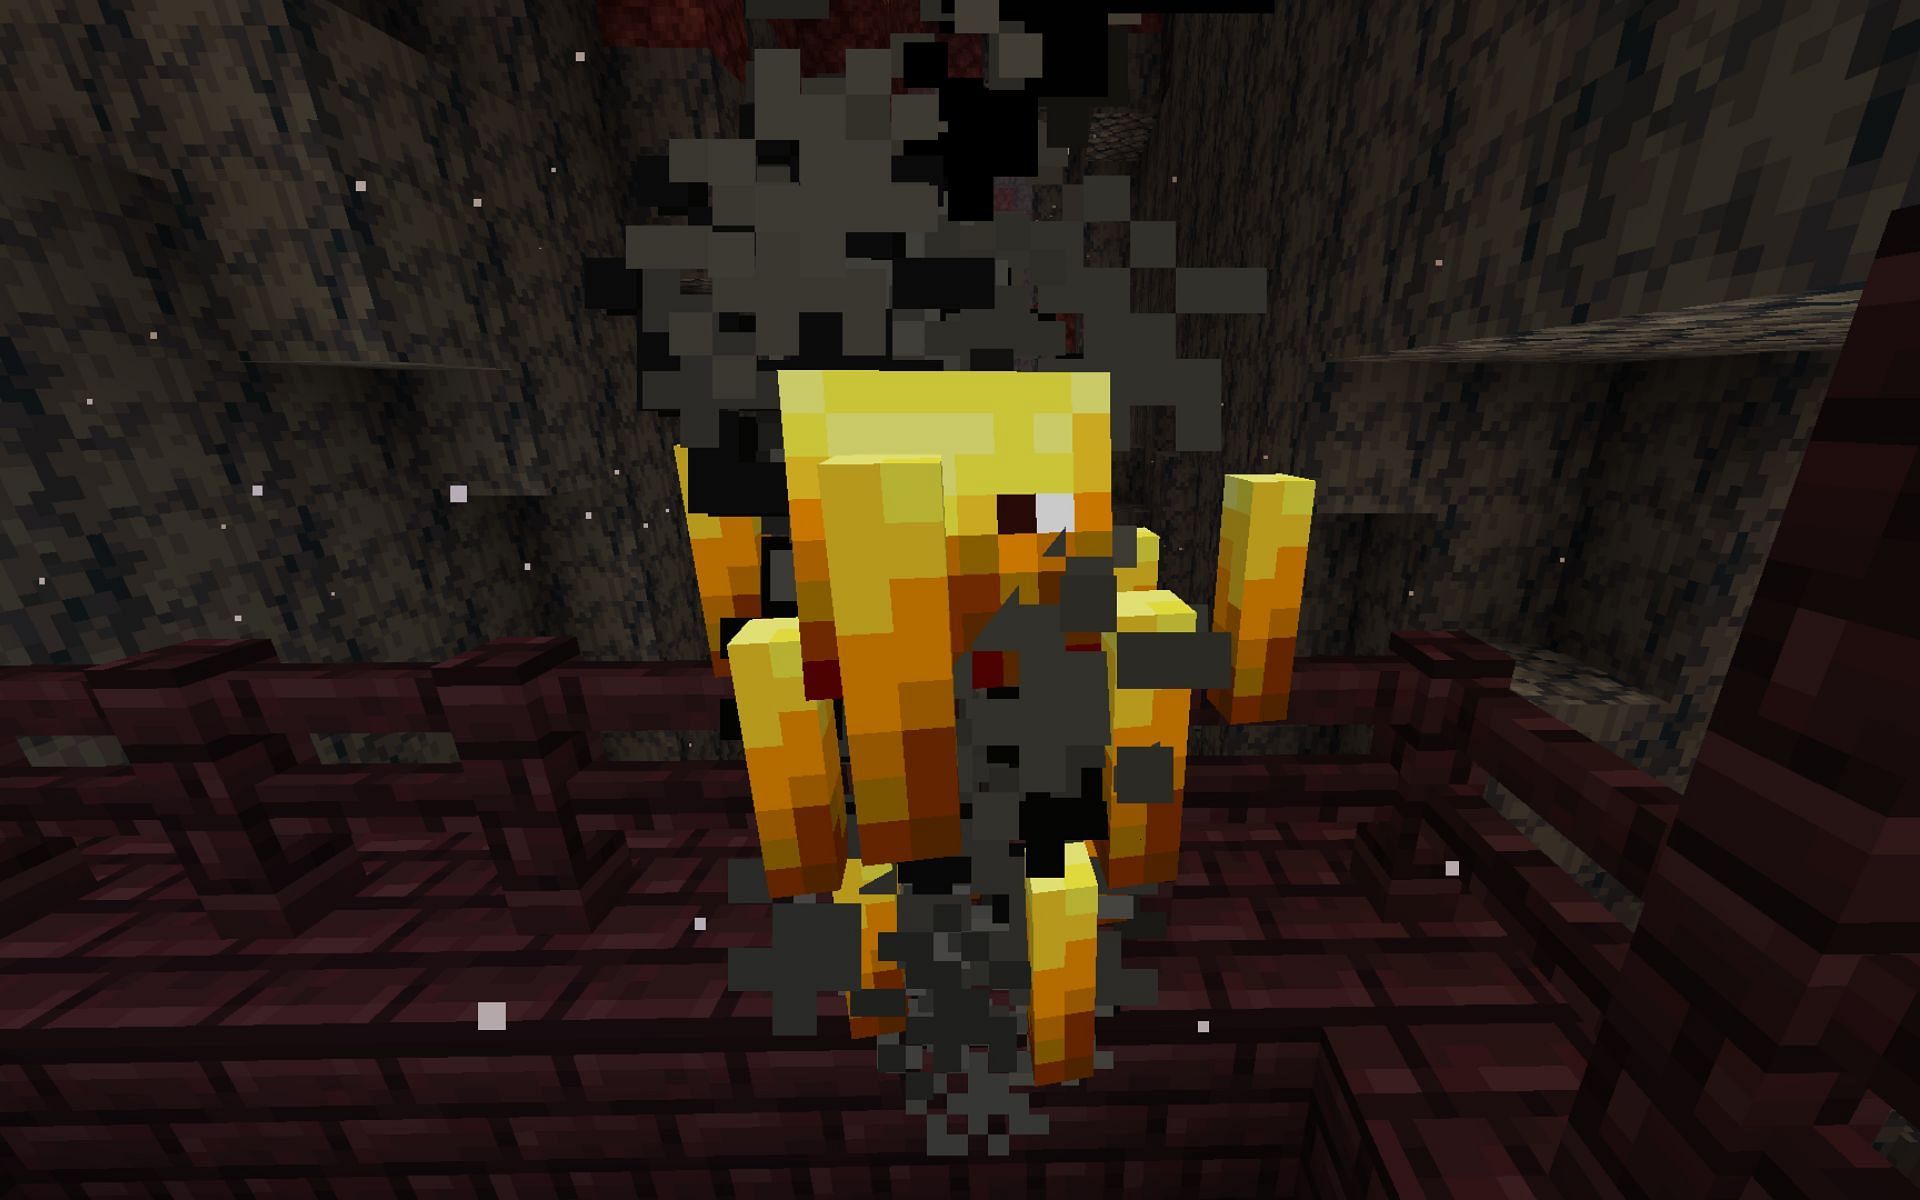 Players need to fight Blaze to progress further in Minecraft (Image via Mojang)